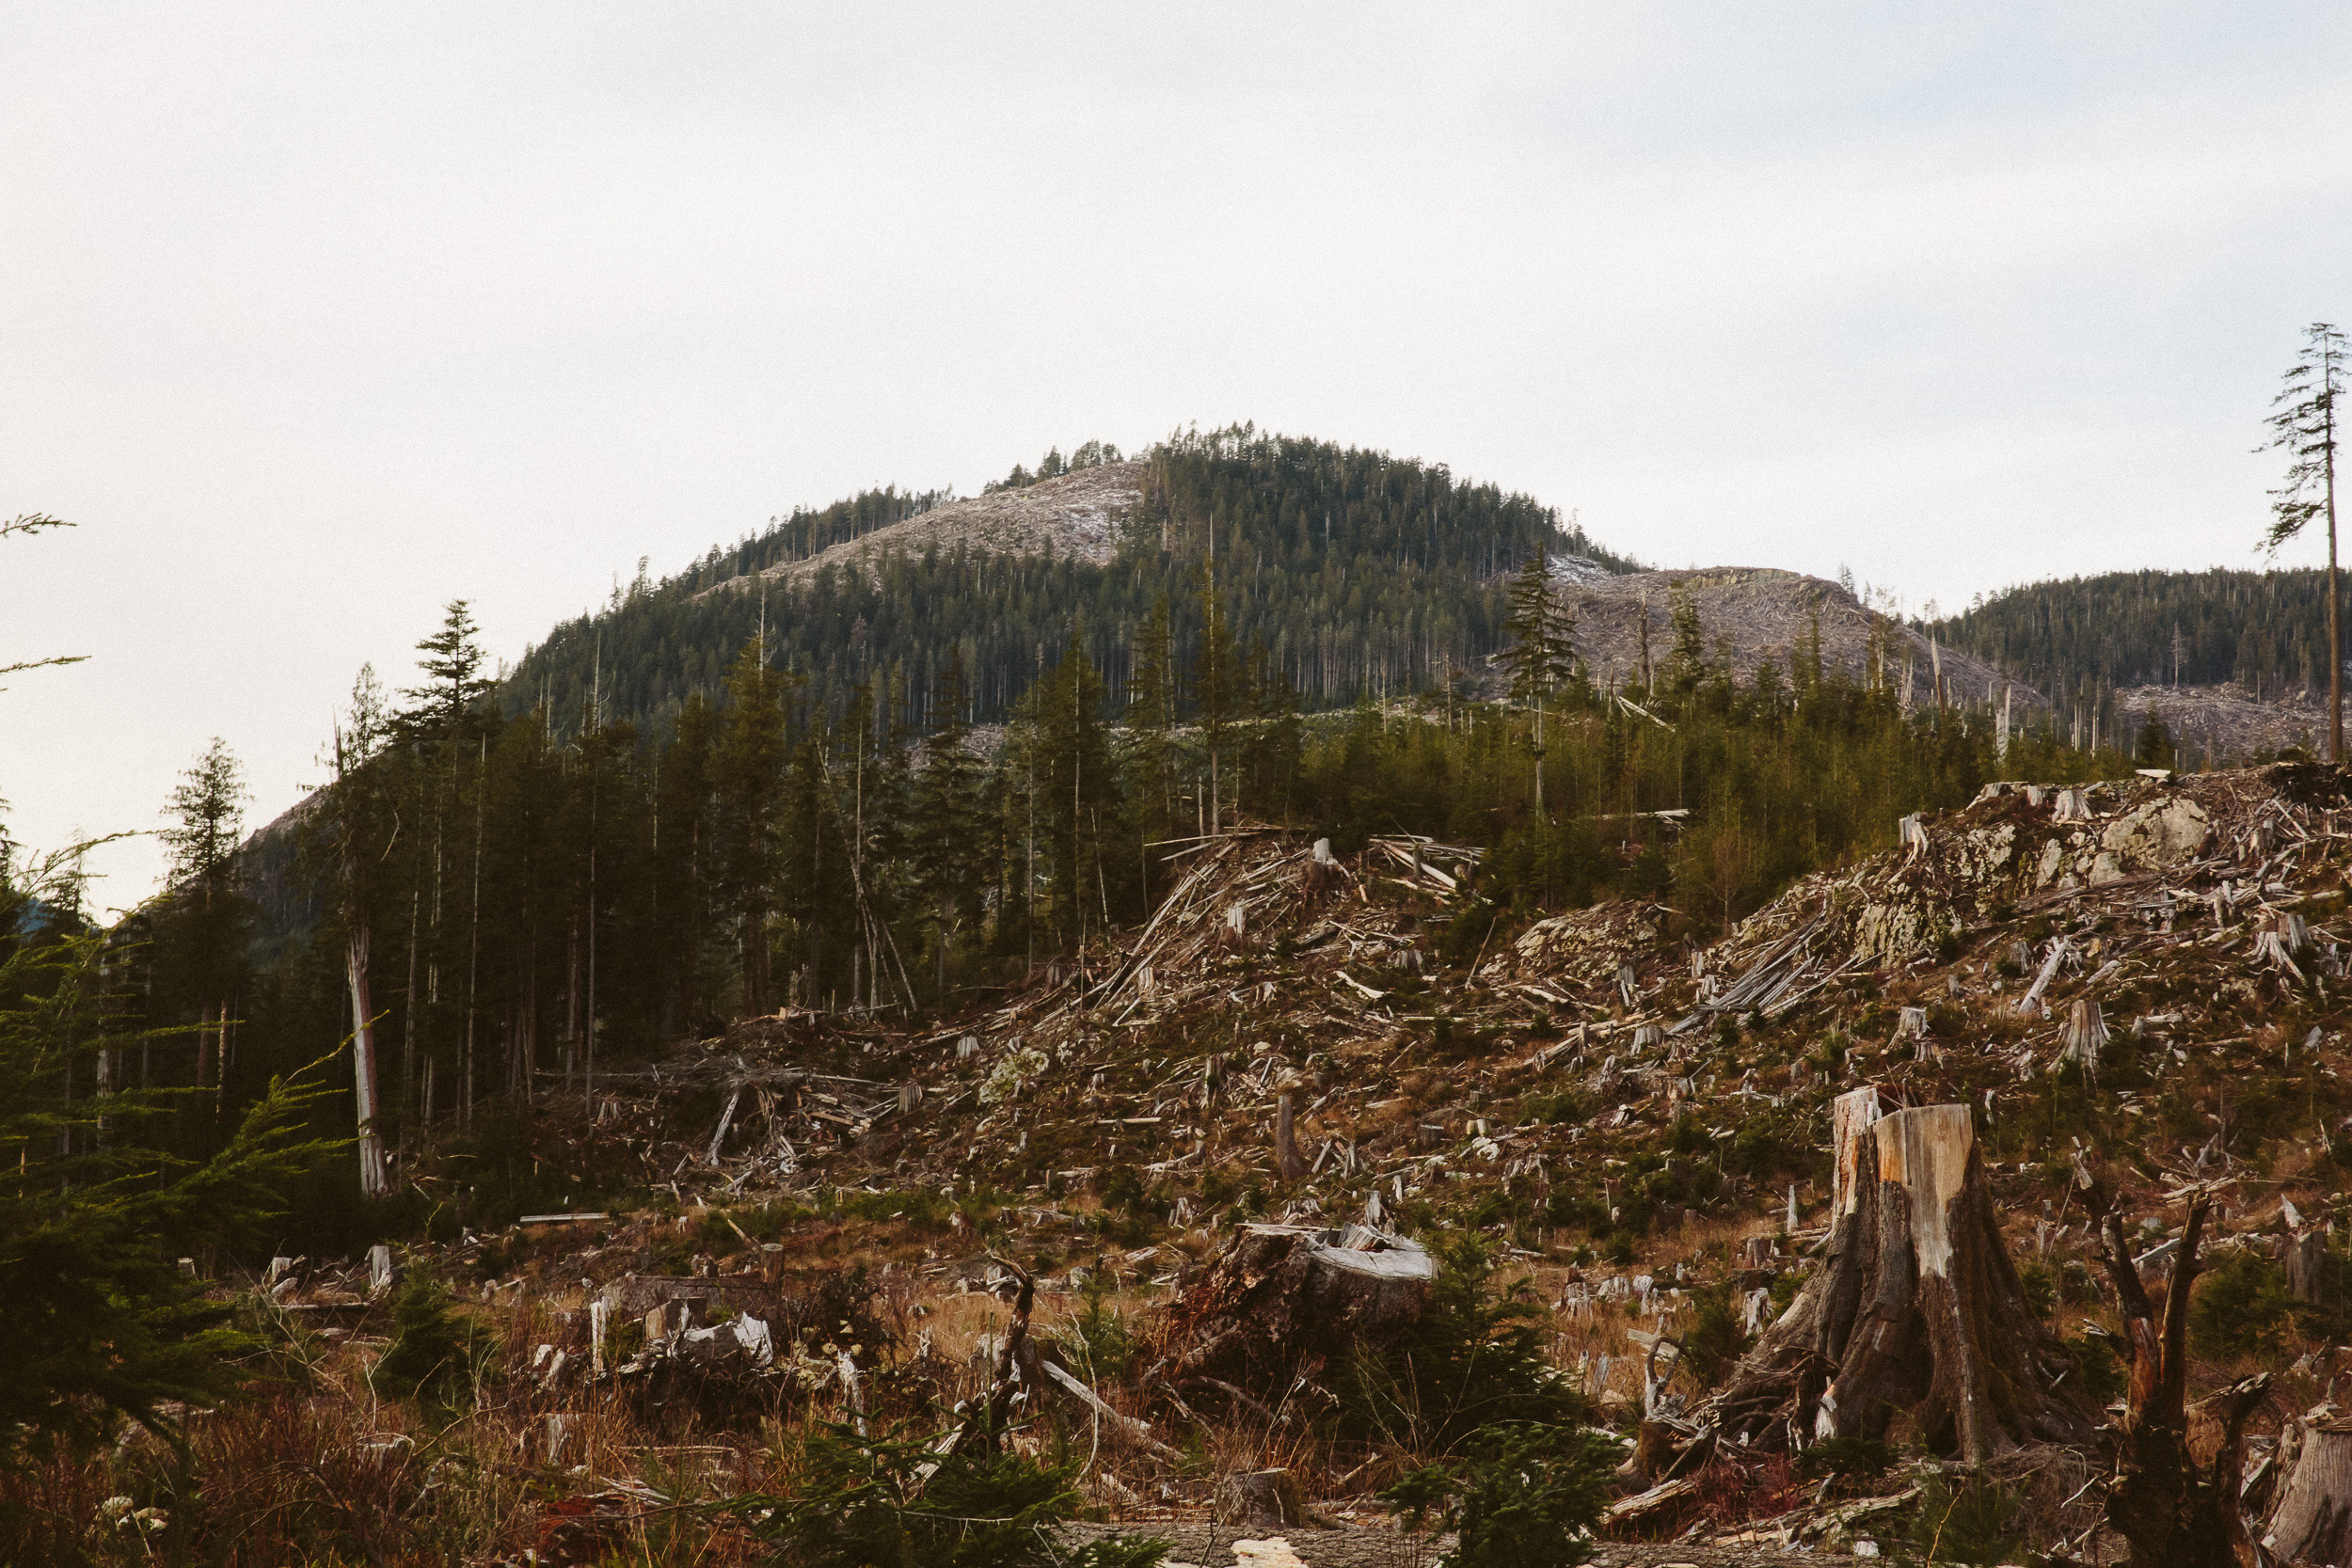 09-Vancouver-Island-Old-Growth-Forests-Logging-Port-Renfrew-Big-Lonely-Doug-Clearcut.jpg